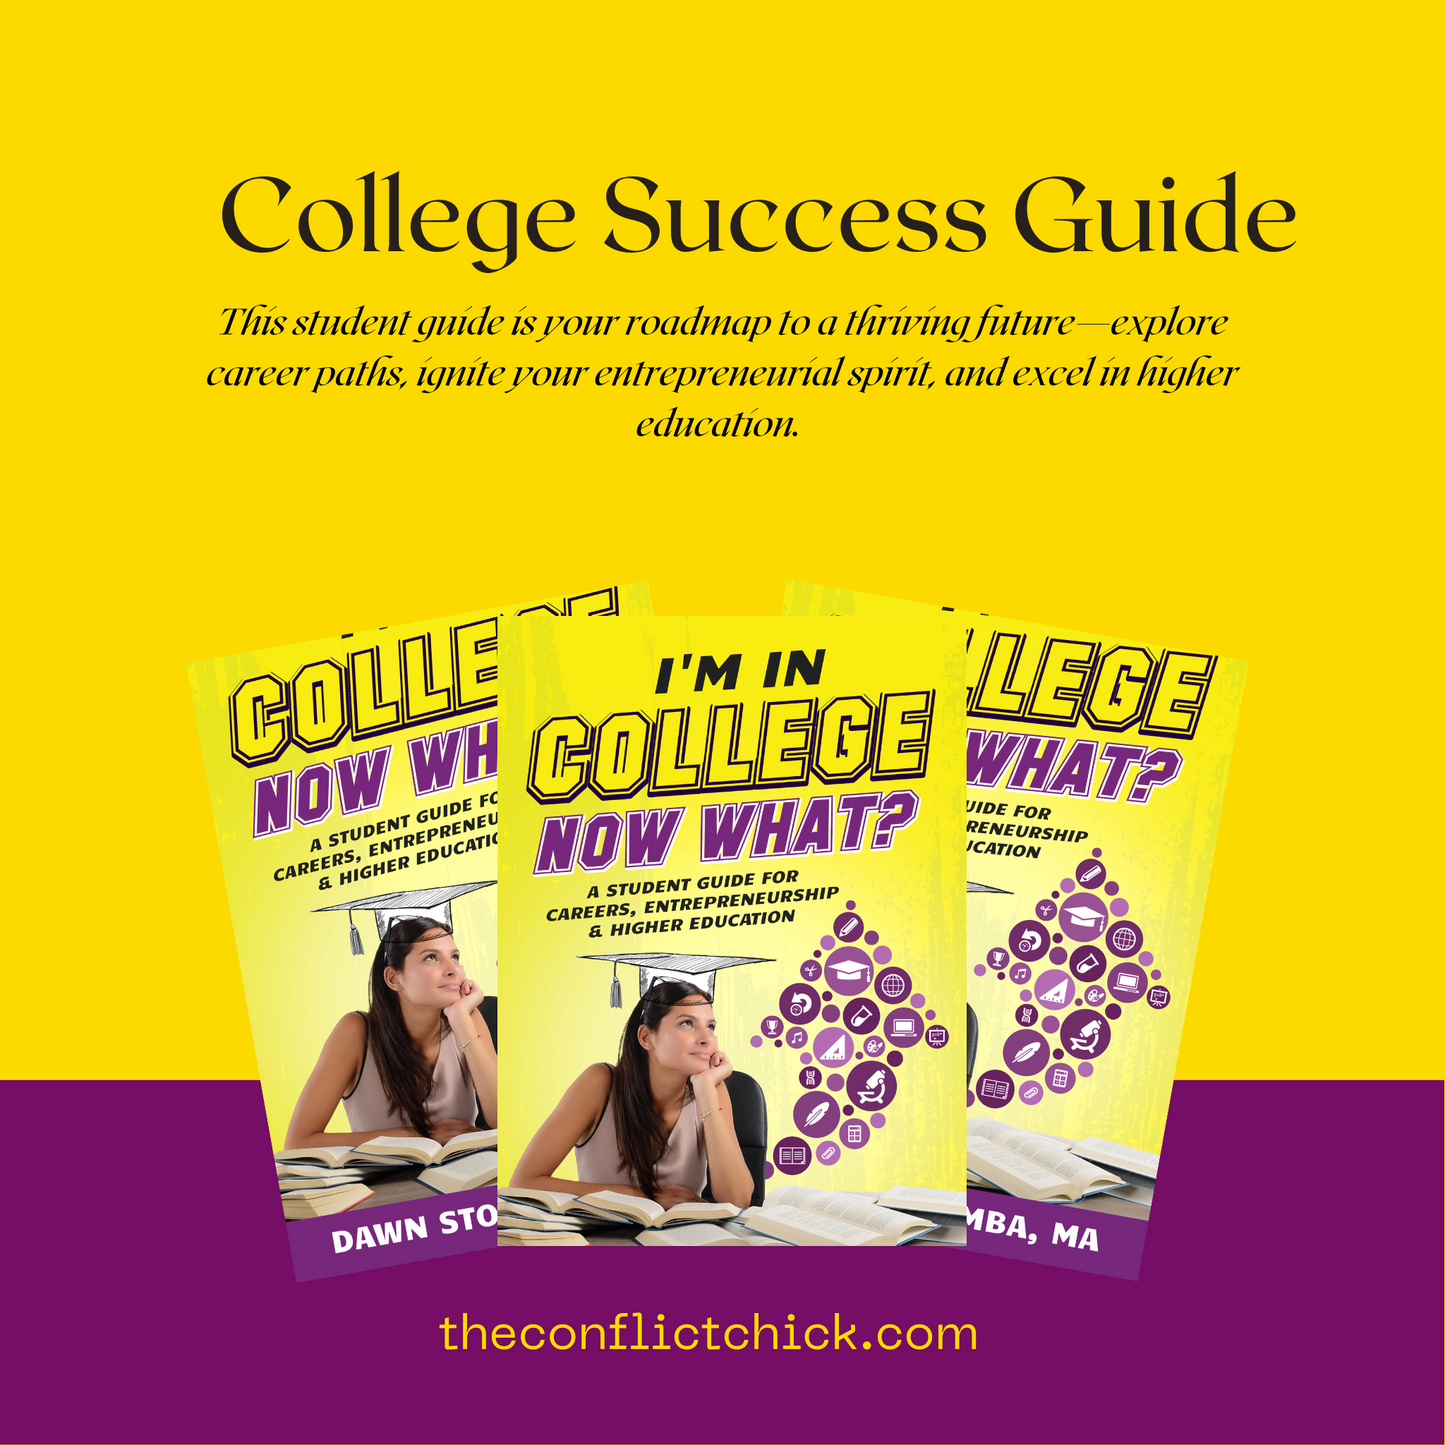 I'm In College Now What? - A Student Guide for  Careers, Entrepreneurship, and Higher Education